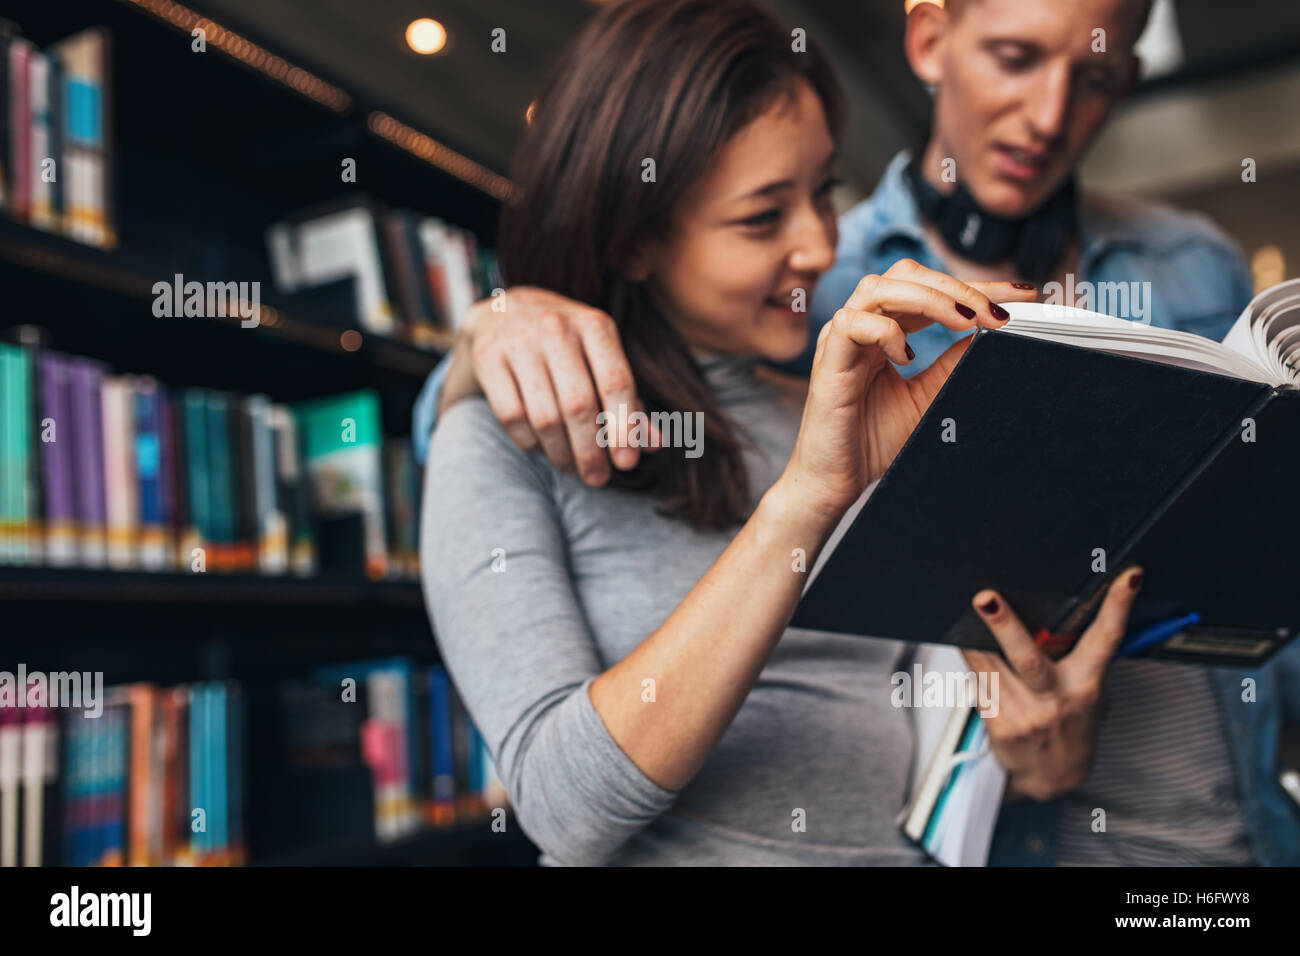 Man and woman standing by bookshelf in library reading a book. Students reading a book in a library with focus on hands. Stock Photo